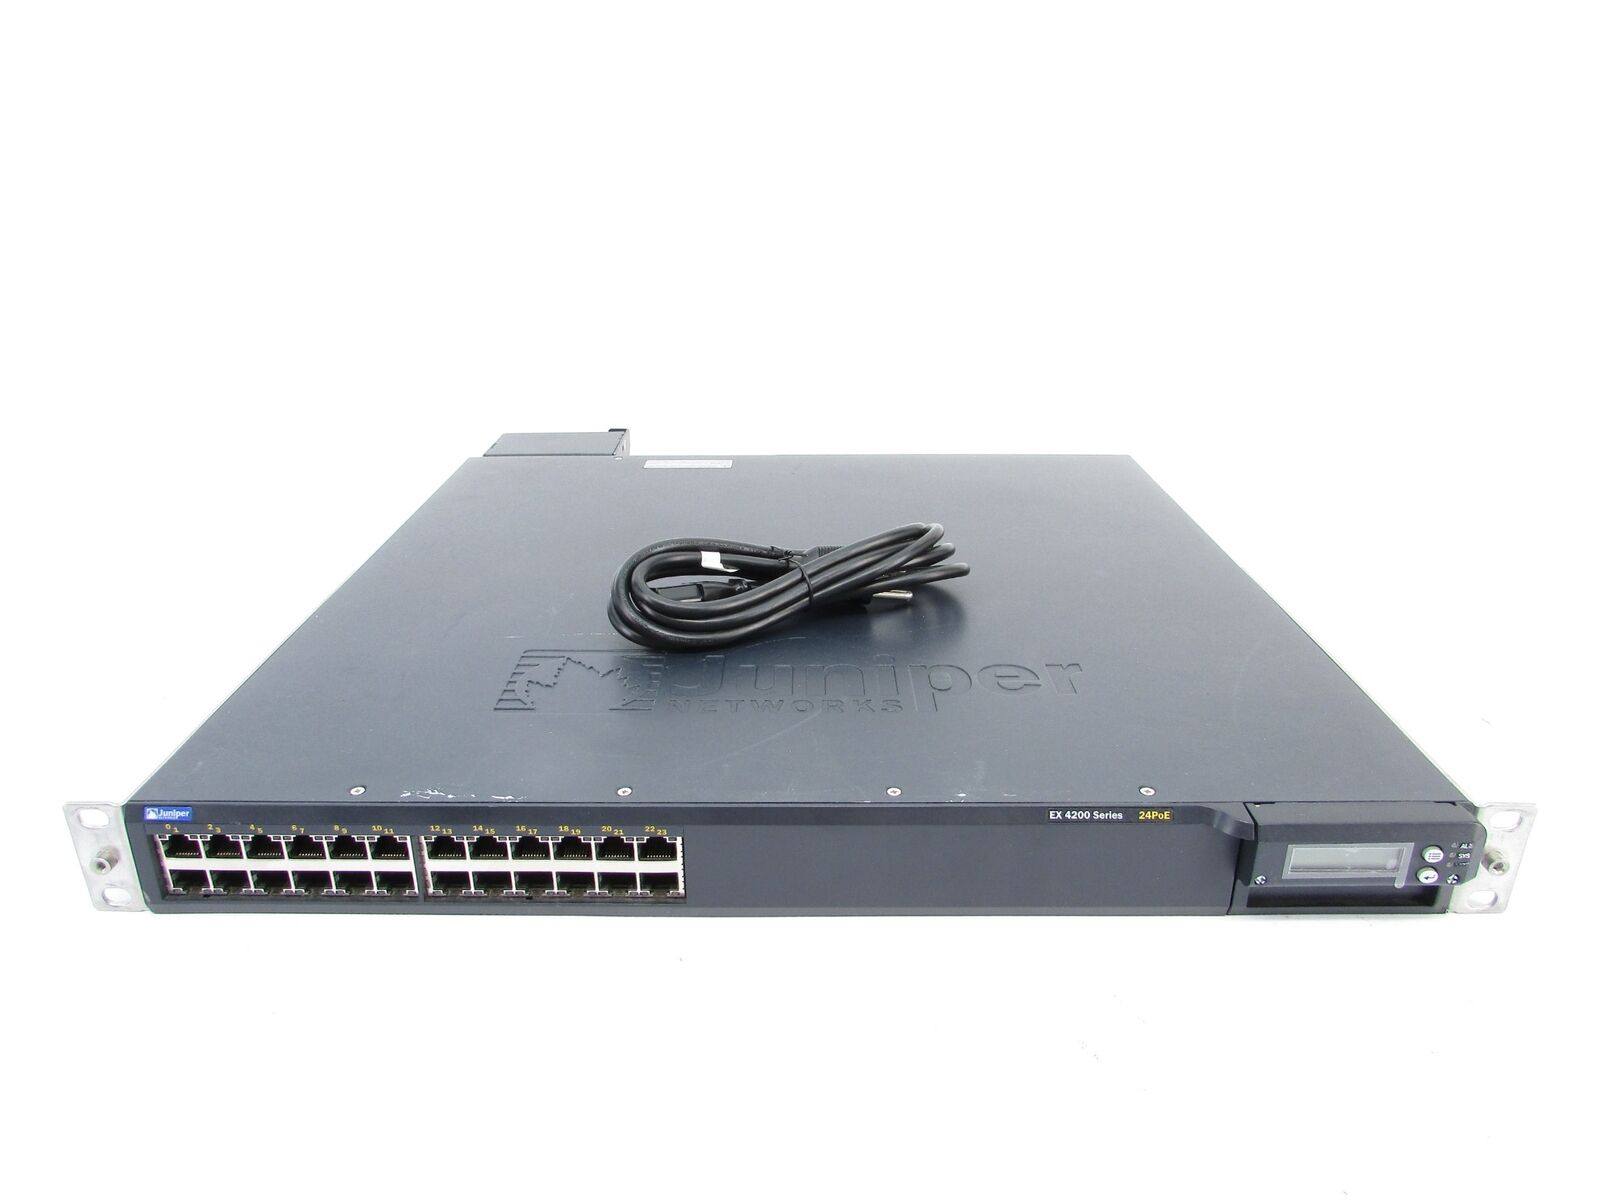 Juniper EX4200-24T 24 Port 10/100/1000BASE-T Ethernet Switch With Power Cable